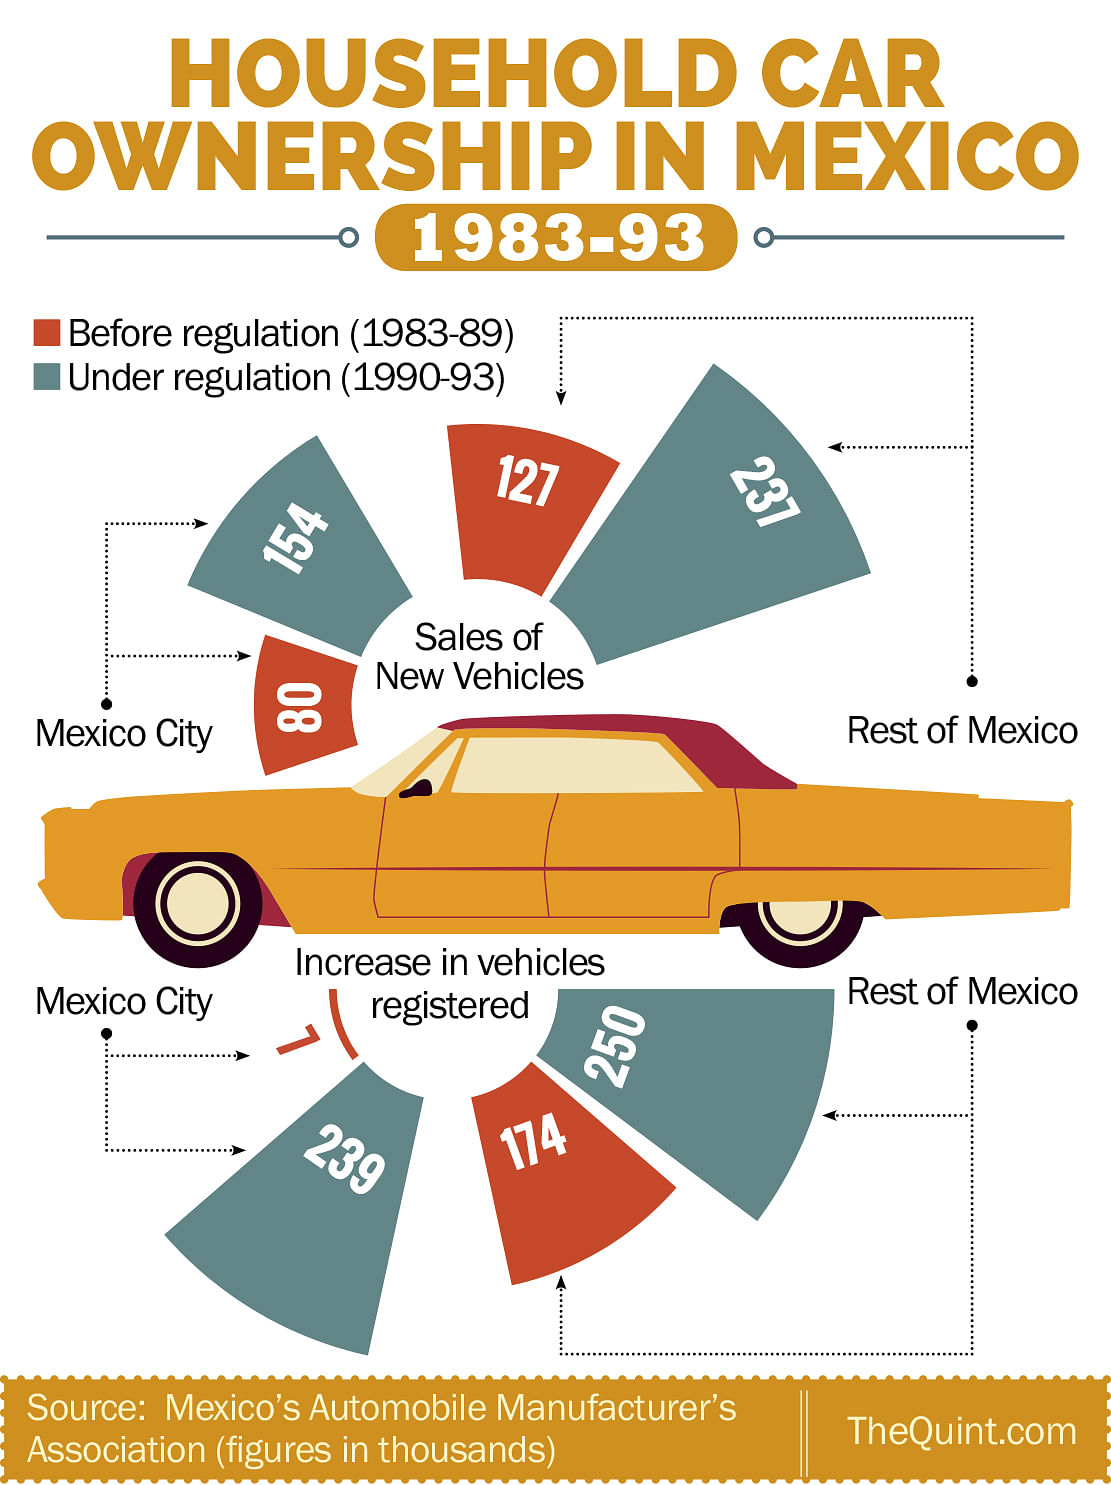 Licence plate ban led people to buy more inferior-quality cars in Mexico, says pollution expert Exequiel Ezcurra.